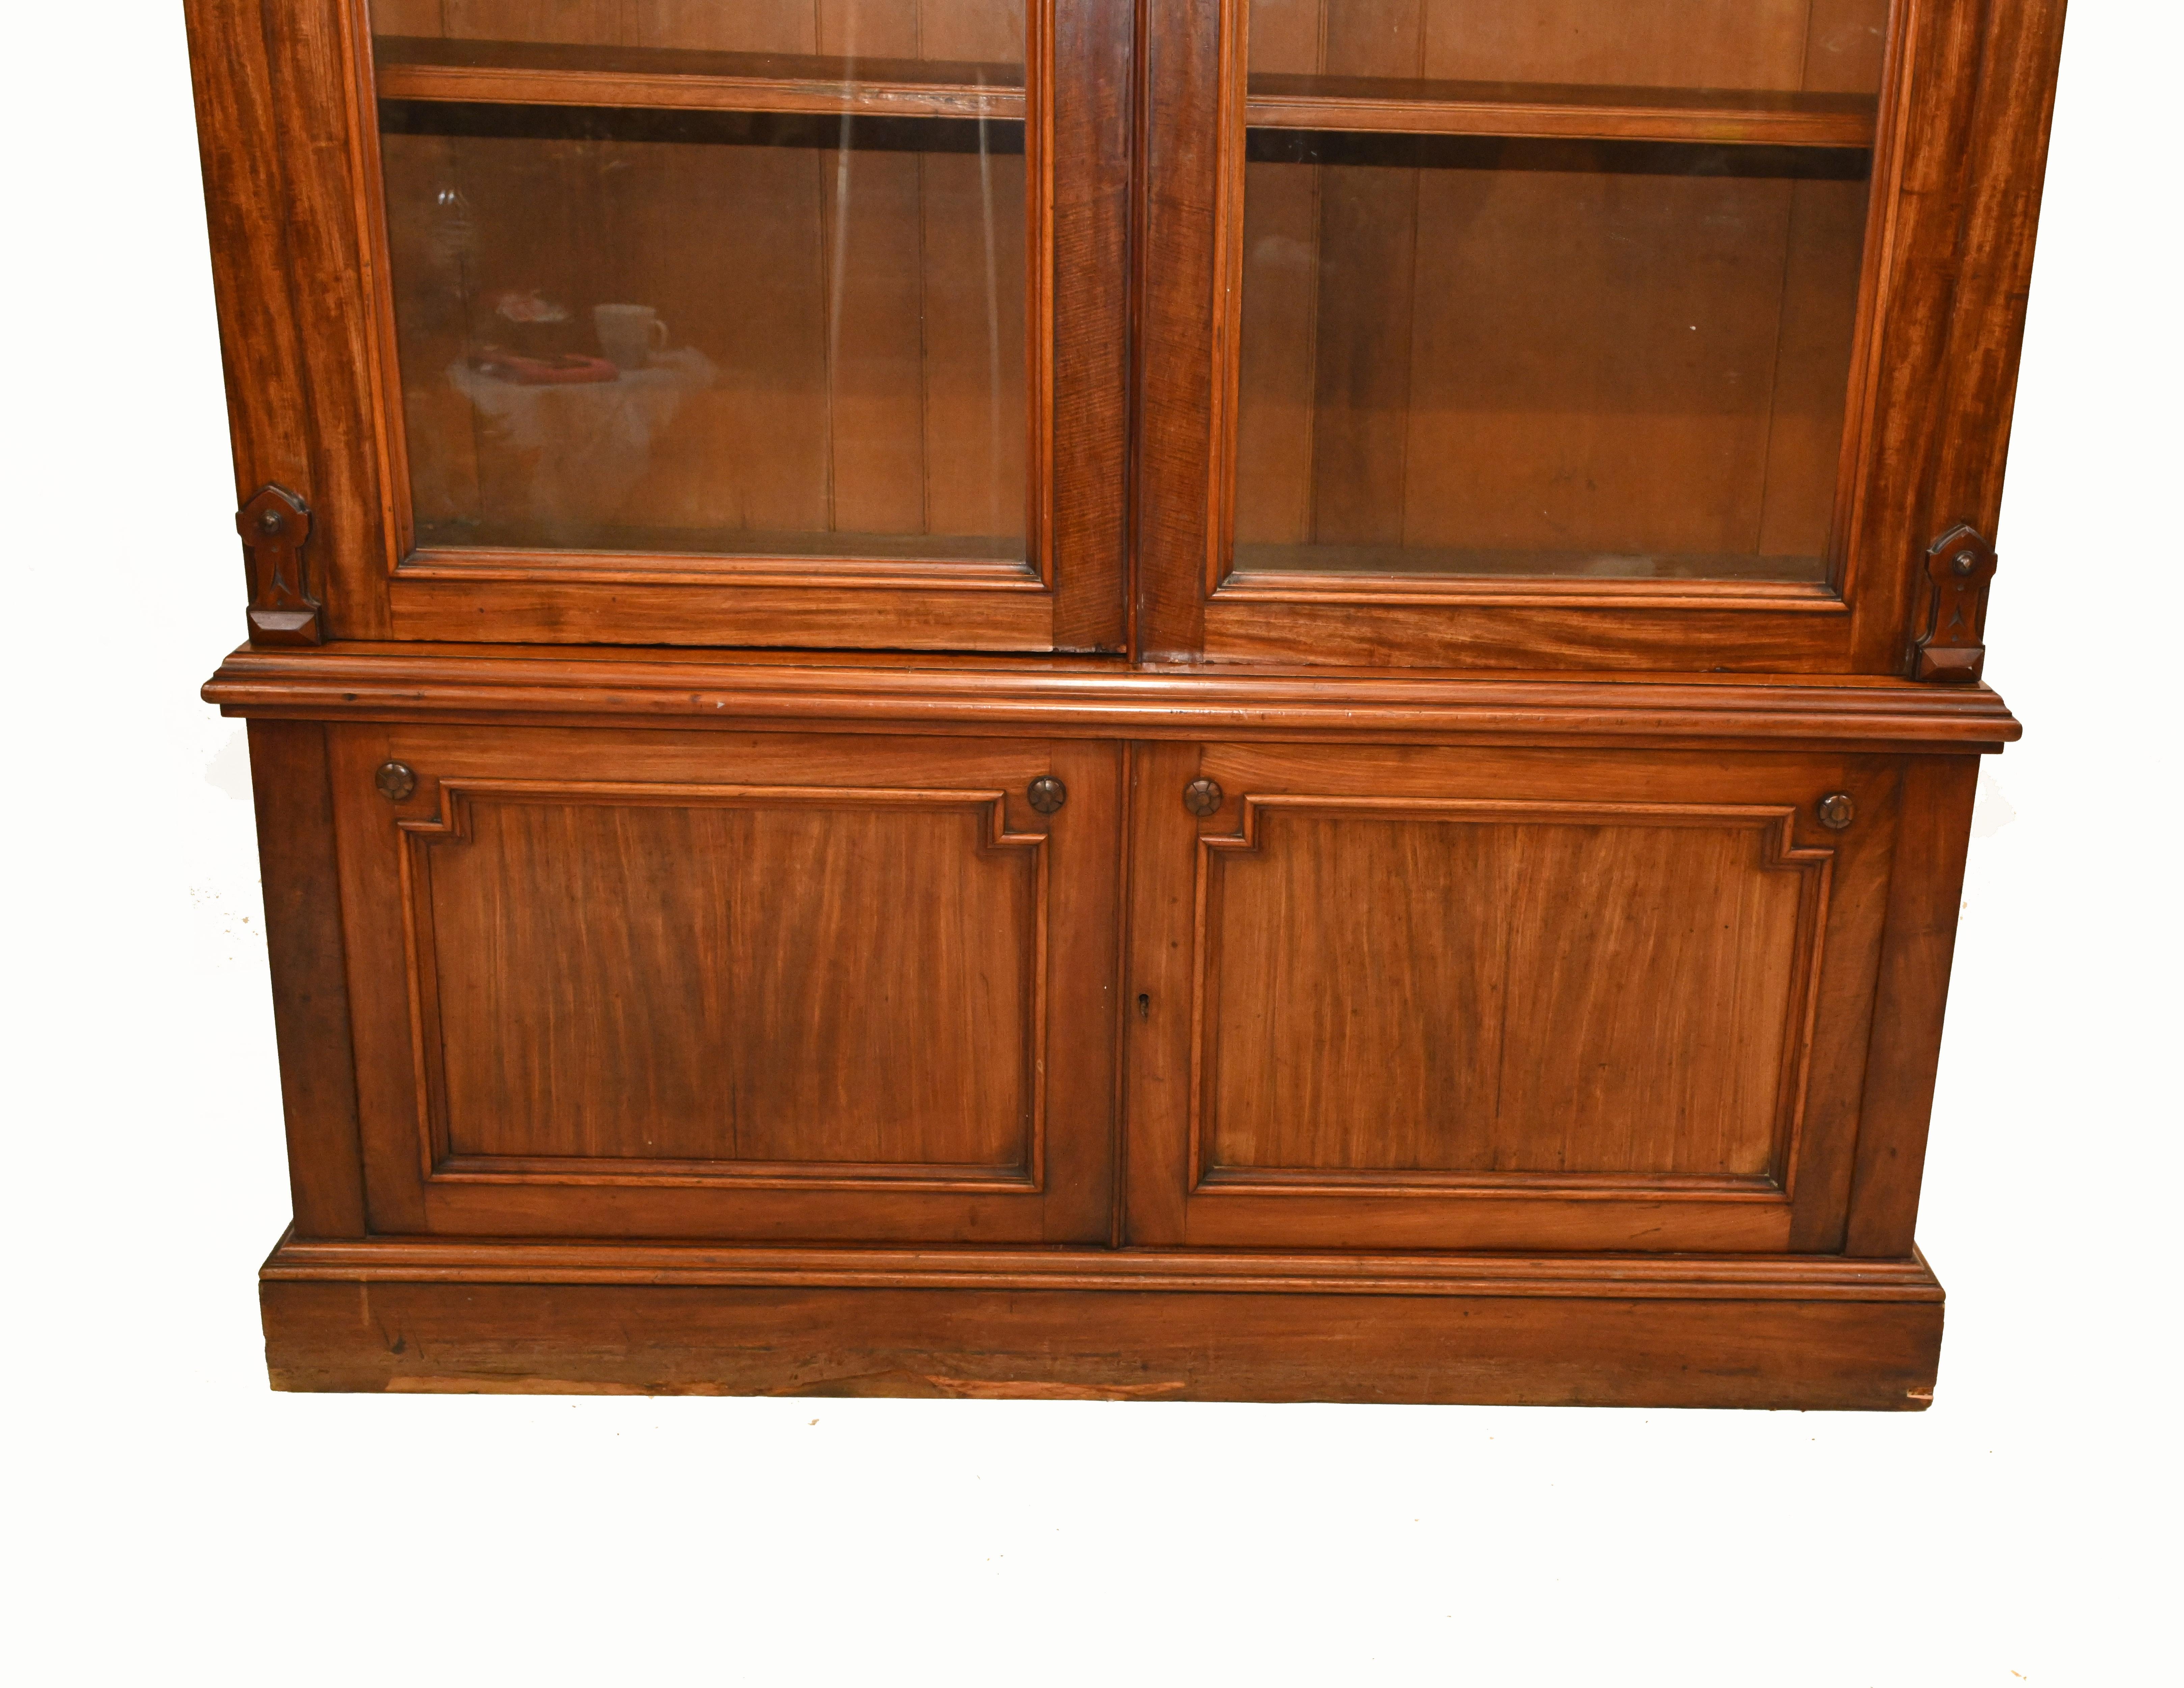 Victorian library bookcase display stunning period early-Victorian library bookcase
Hand crafted from mahogany with glass fronted top
We date this piece to circa 1840 and it's in great shape
Viewing by appointment
Offered in great shape ready